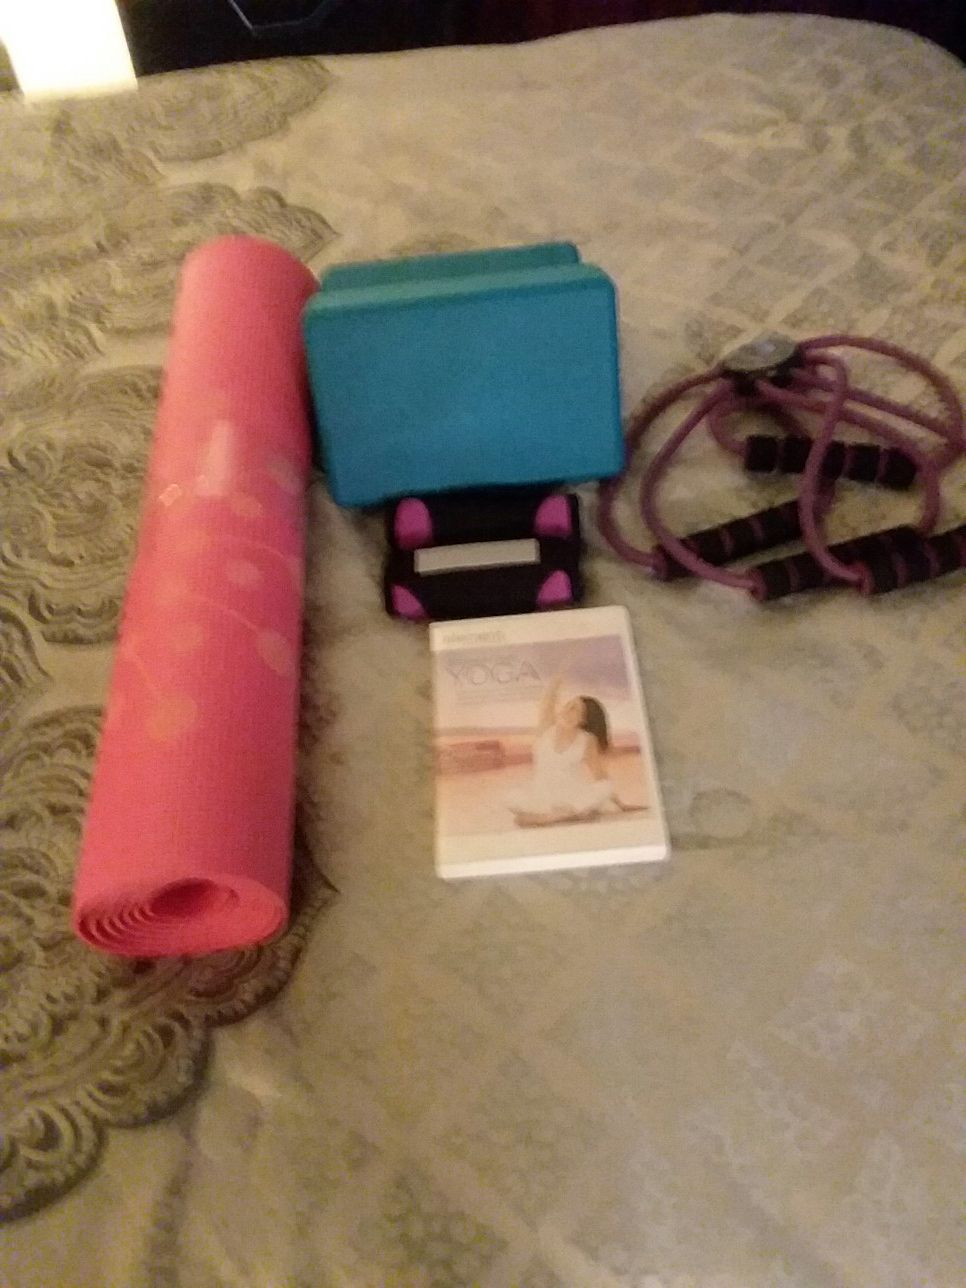 Yoga items everything from mat to video weights and